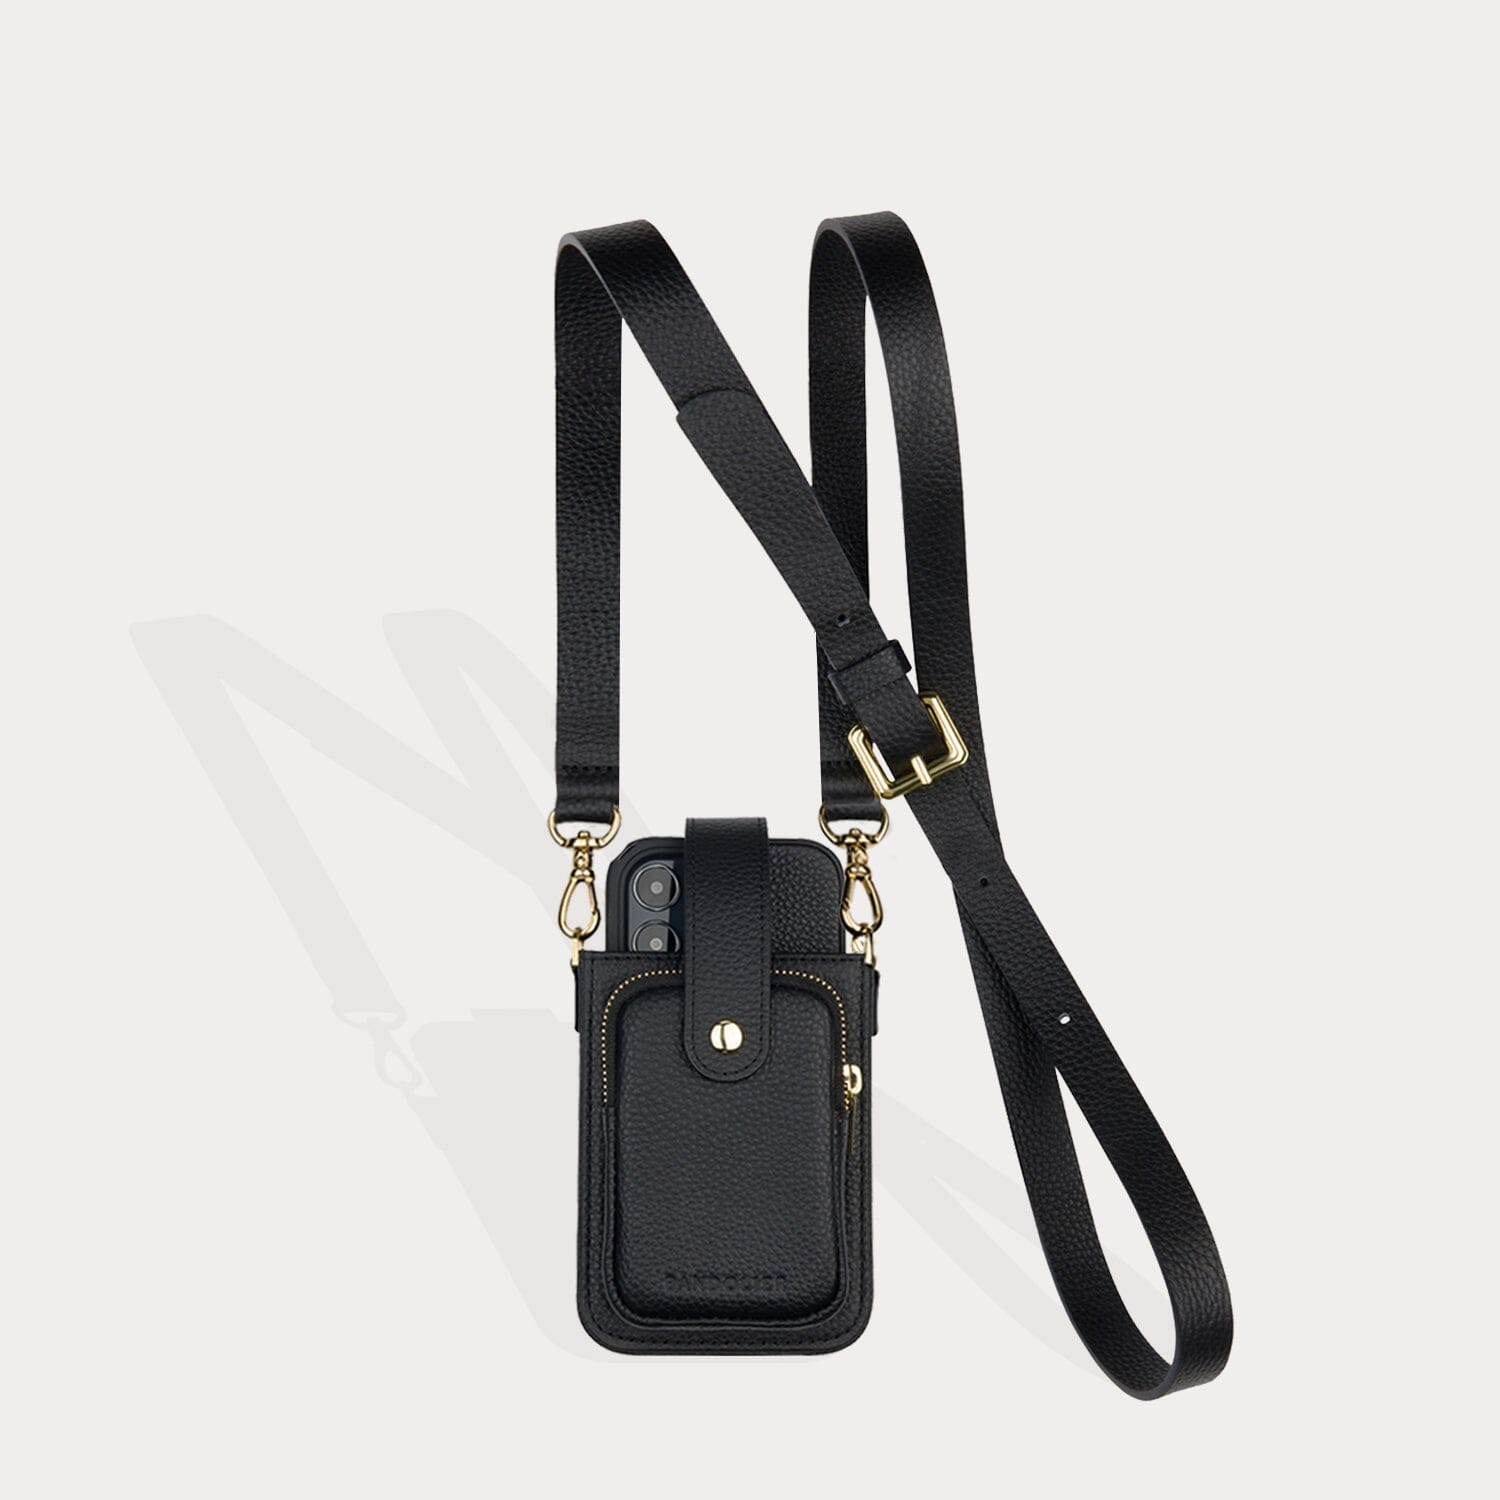 Hailey Phone Pouch and Holster in Black/Gold | Genuine Leather | Bandolier Style